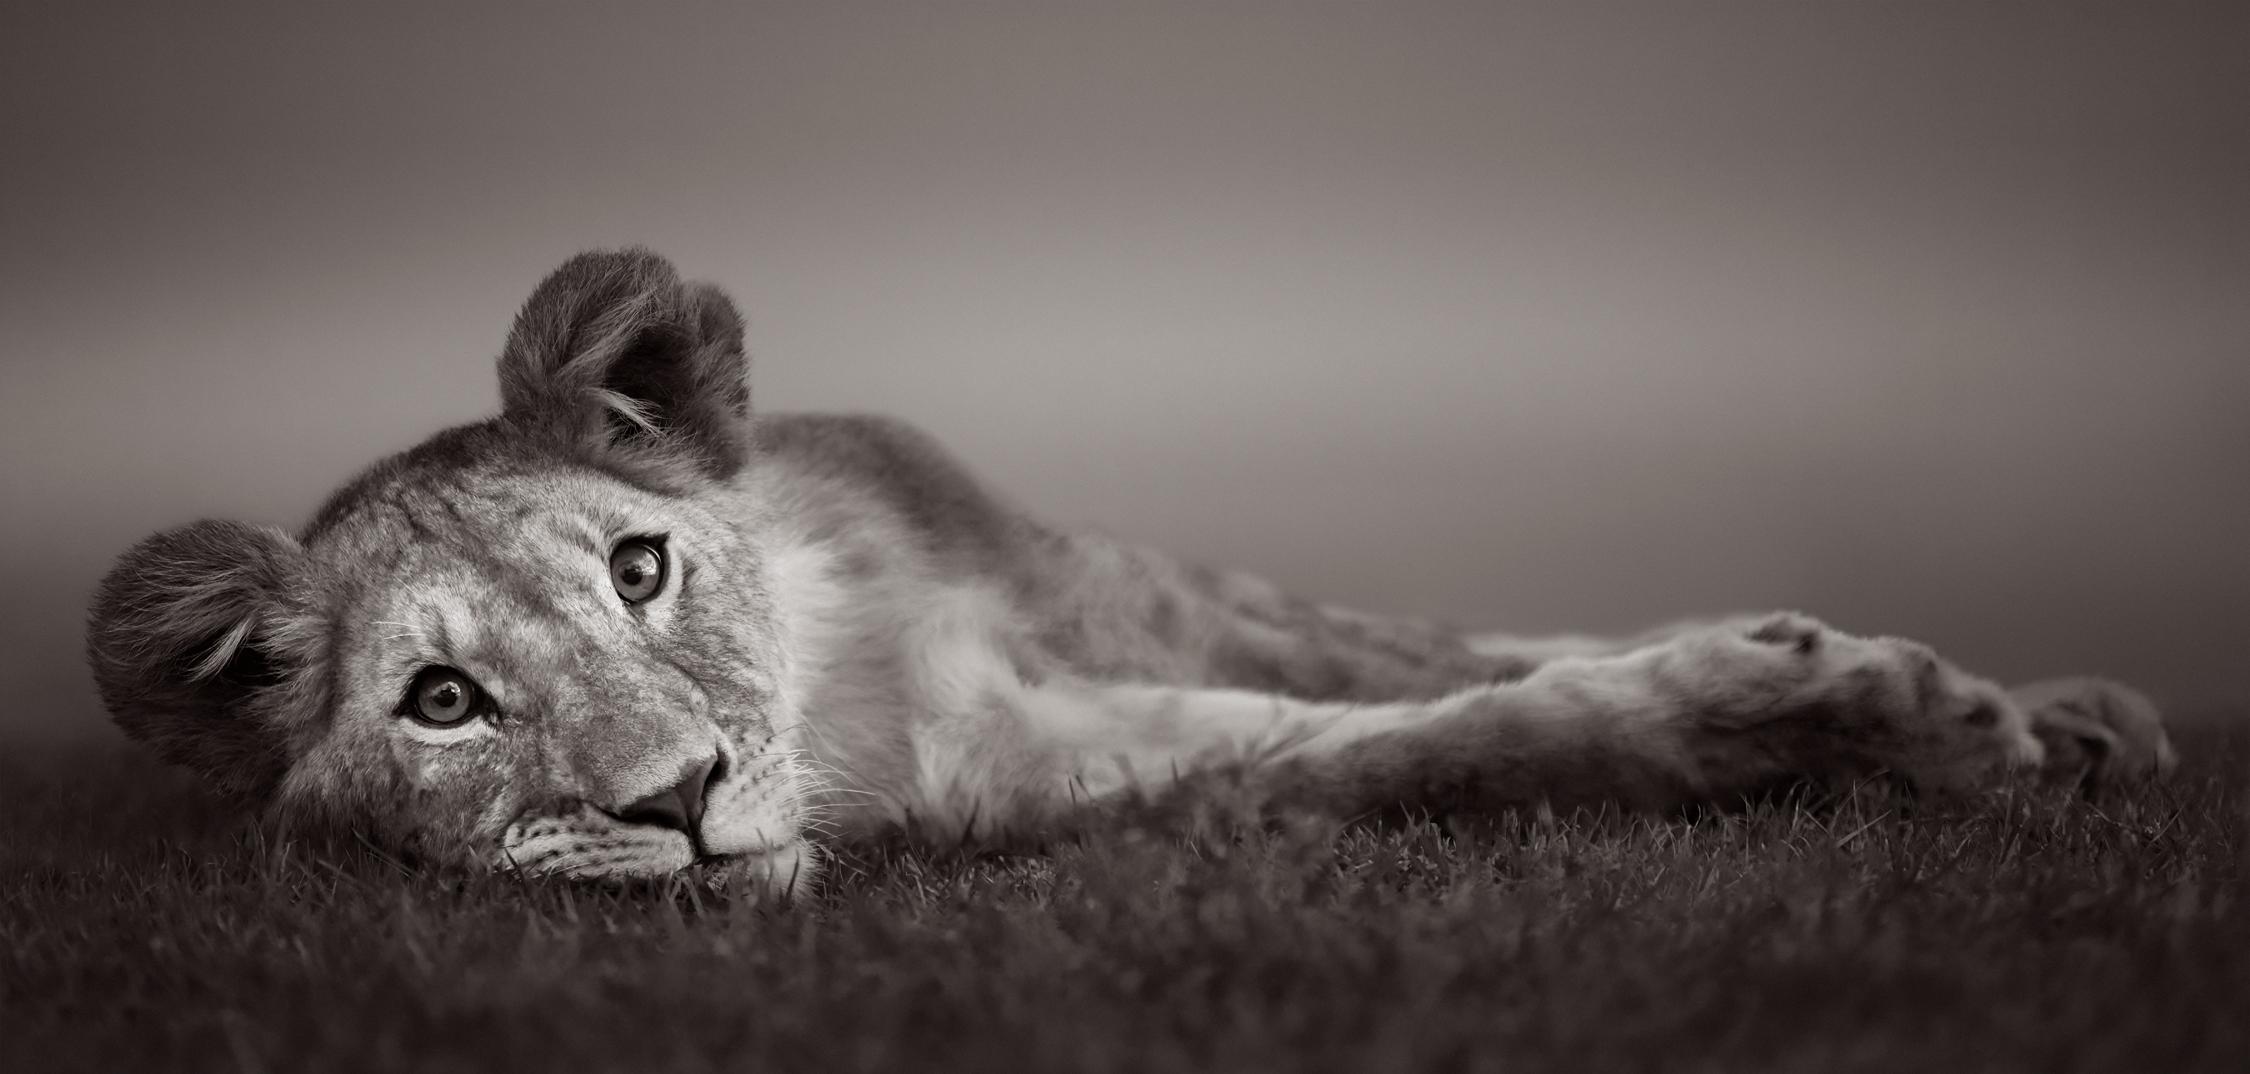 Young Lion Cub Relaxing in the Grass, Black & White, Kenya